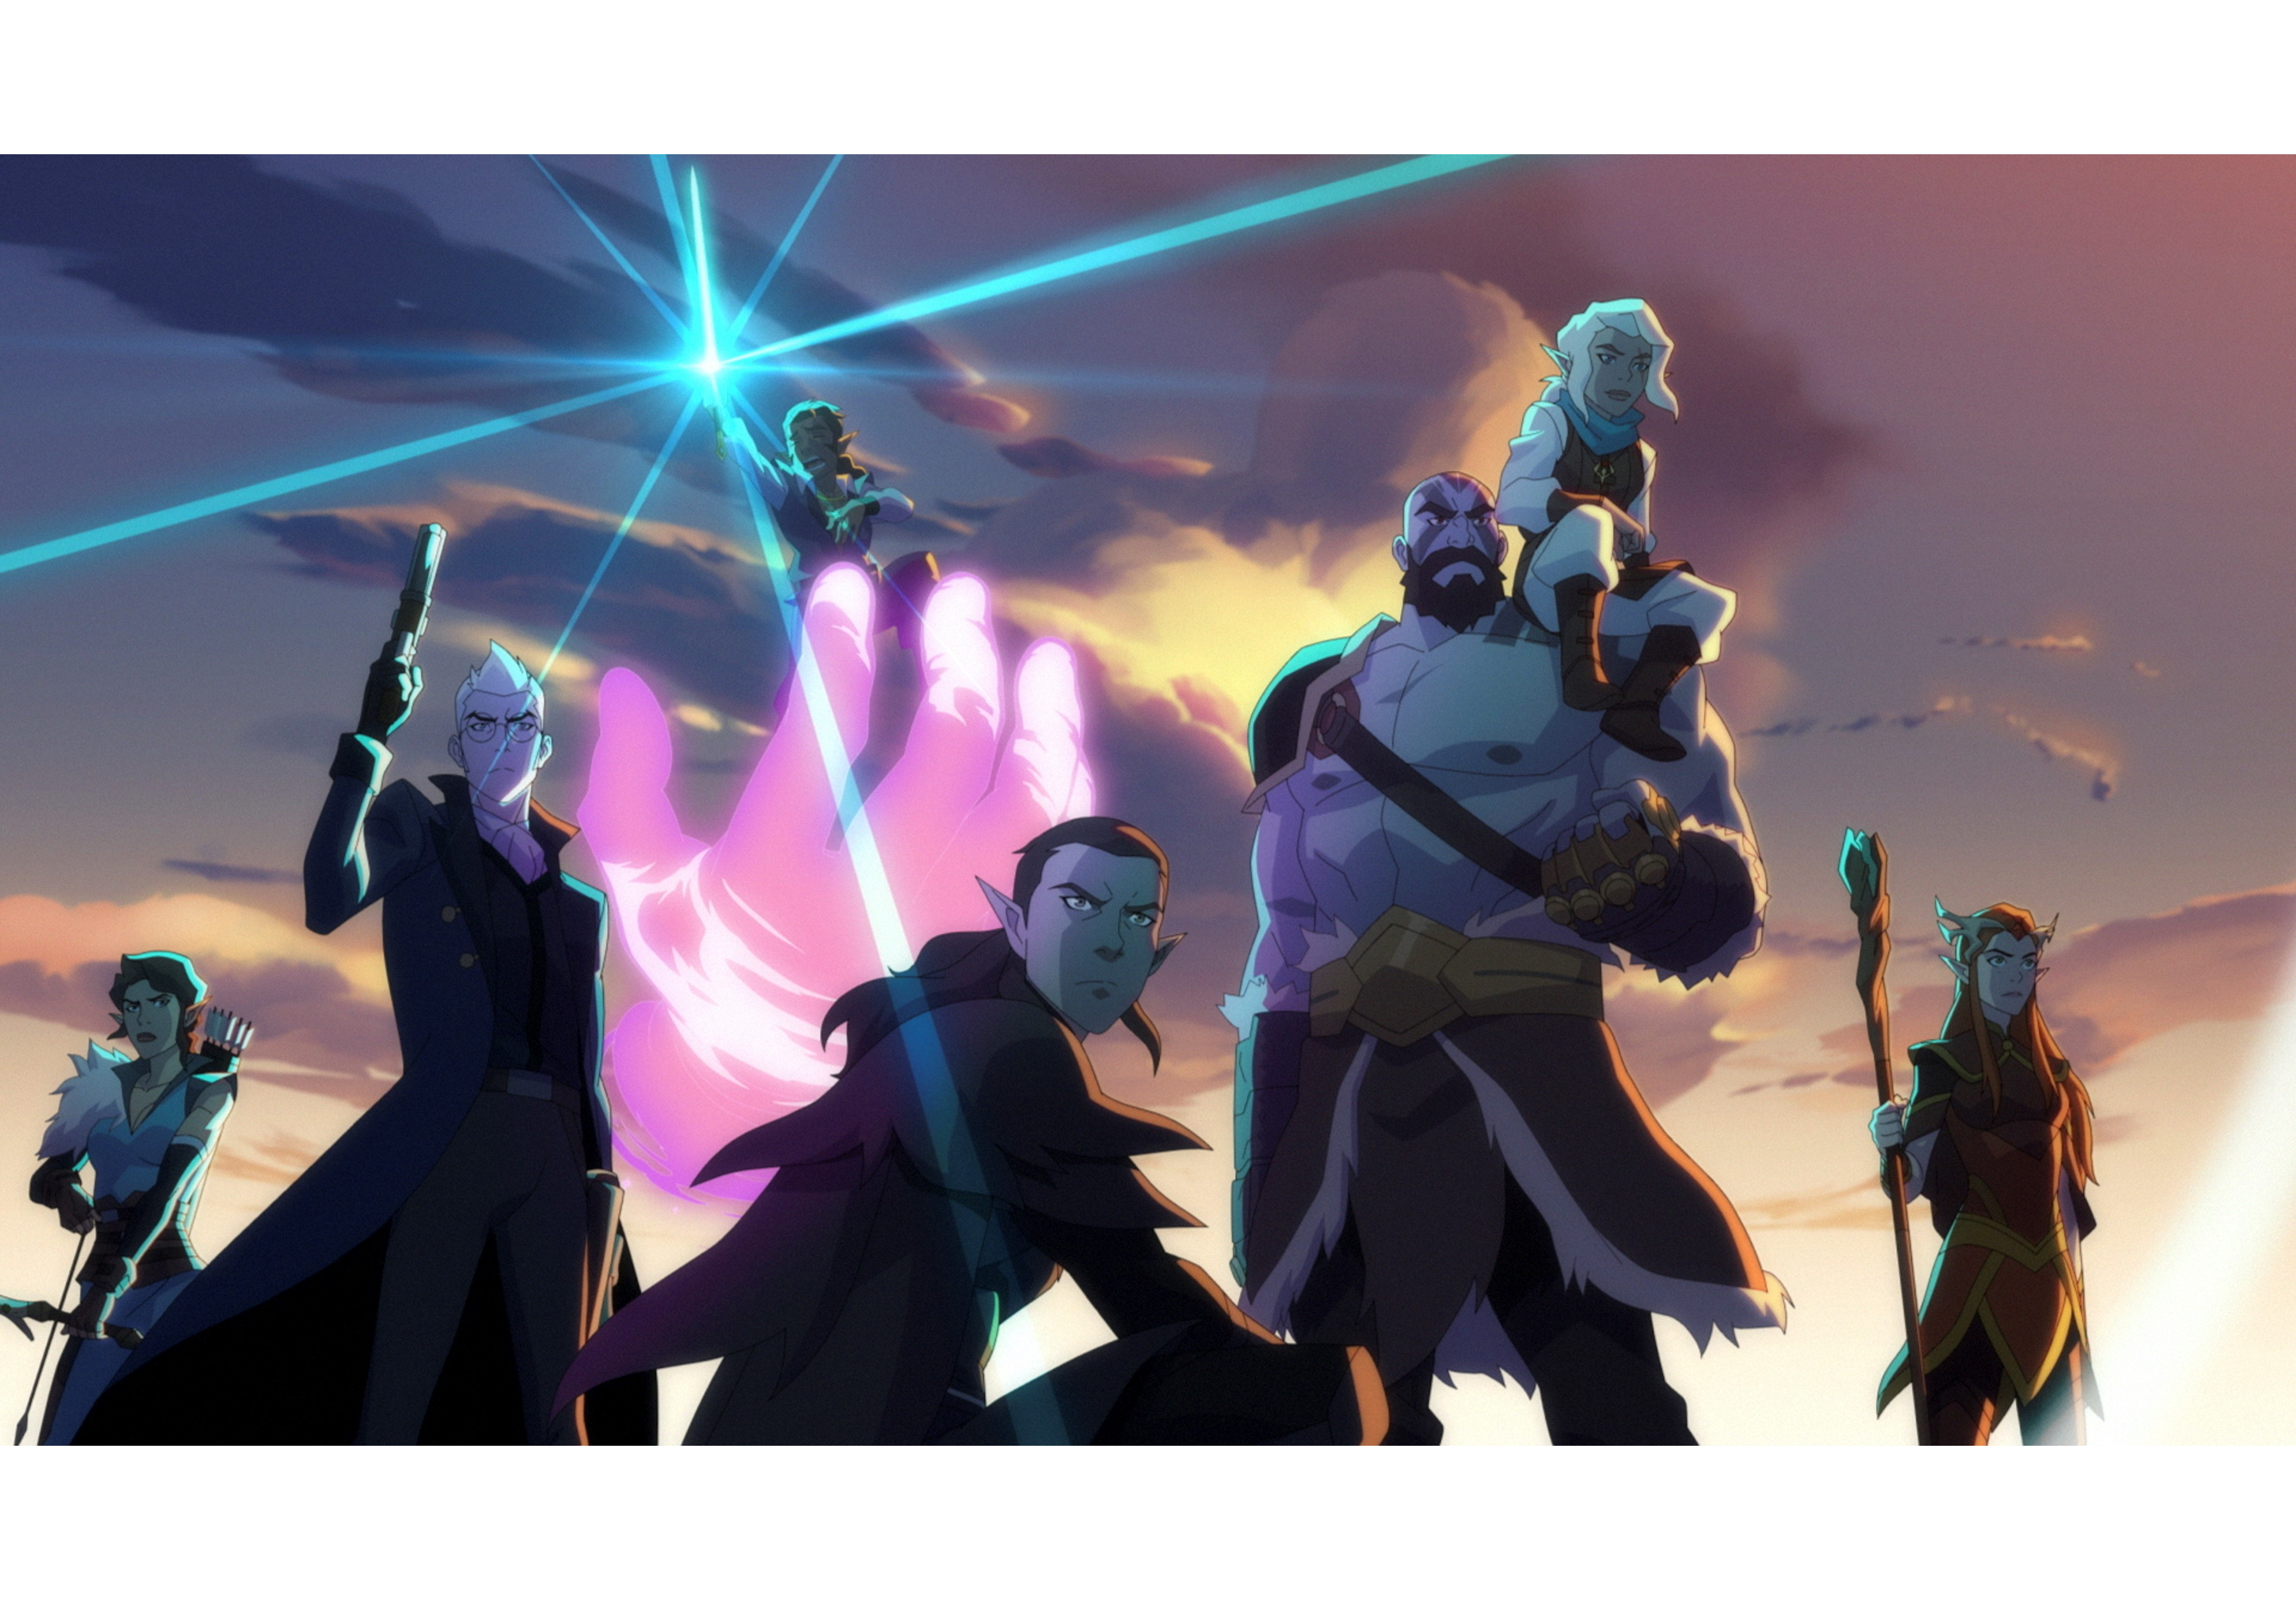 Critical Role’s ‘Legend of Vox Machina’ Season 3 Premiere Date Set at Prime Video, New Title Sequence Revealed